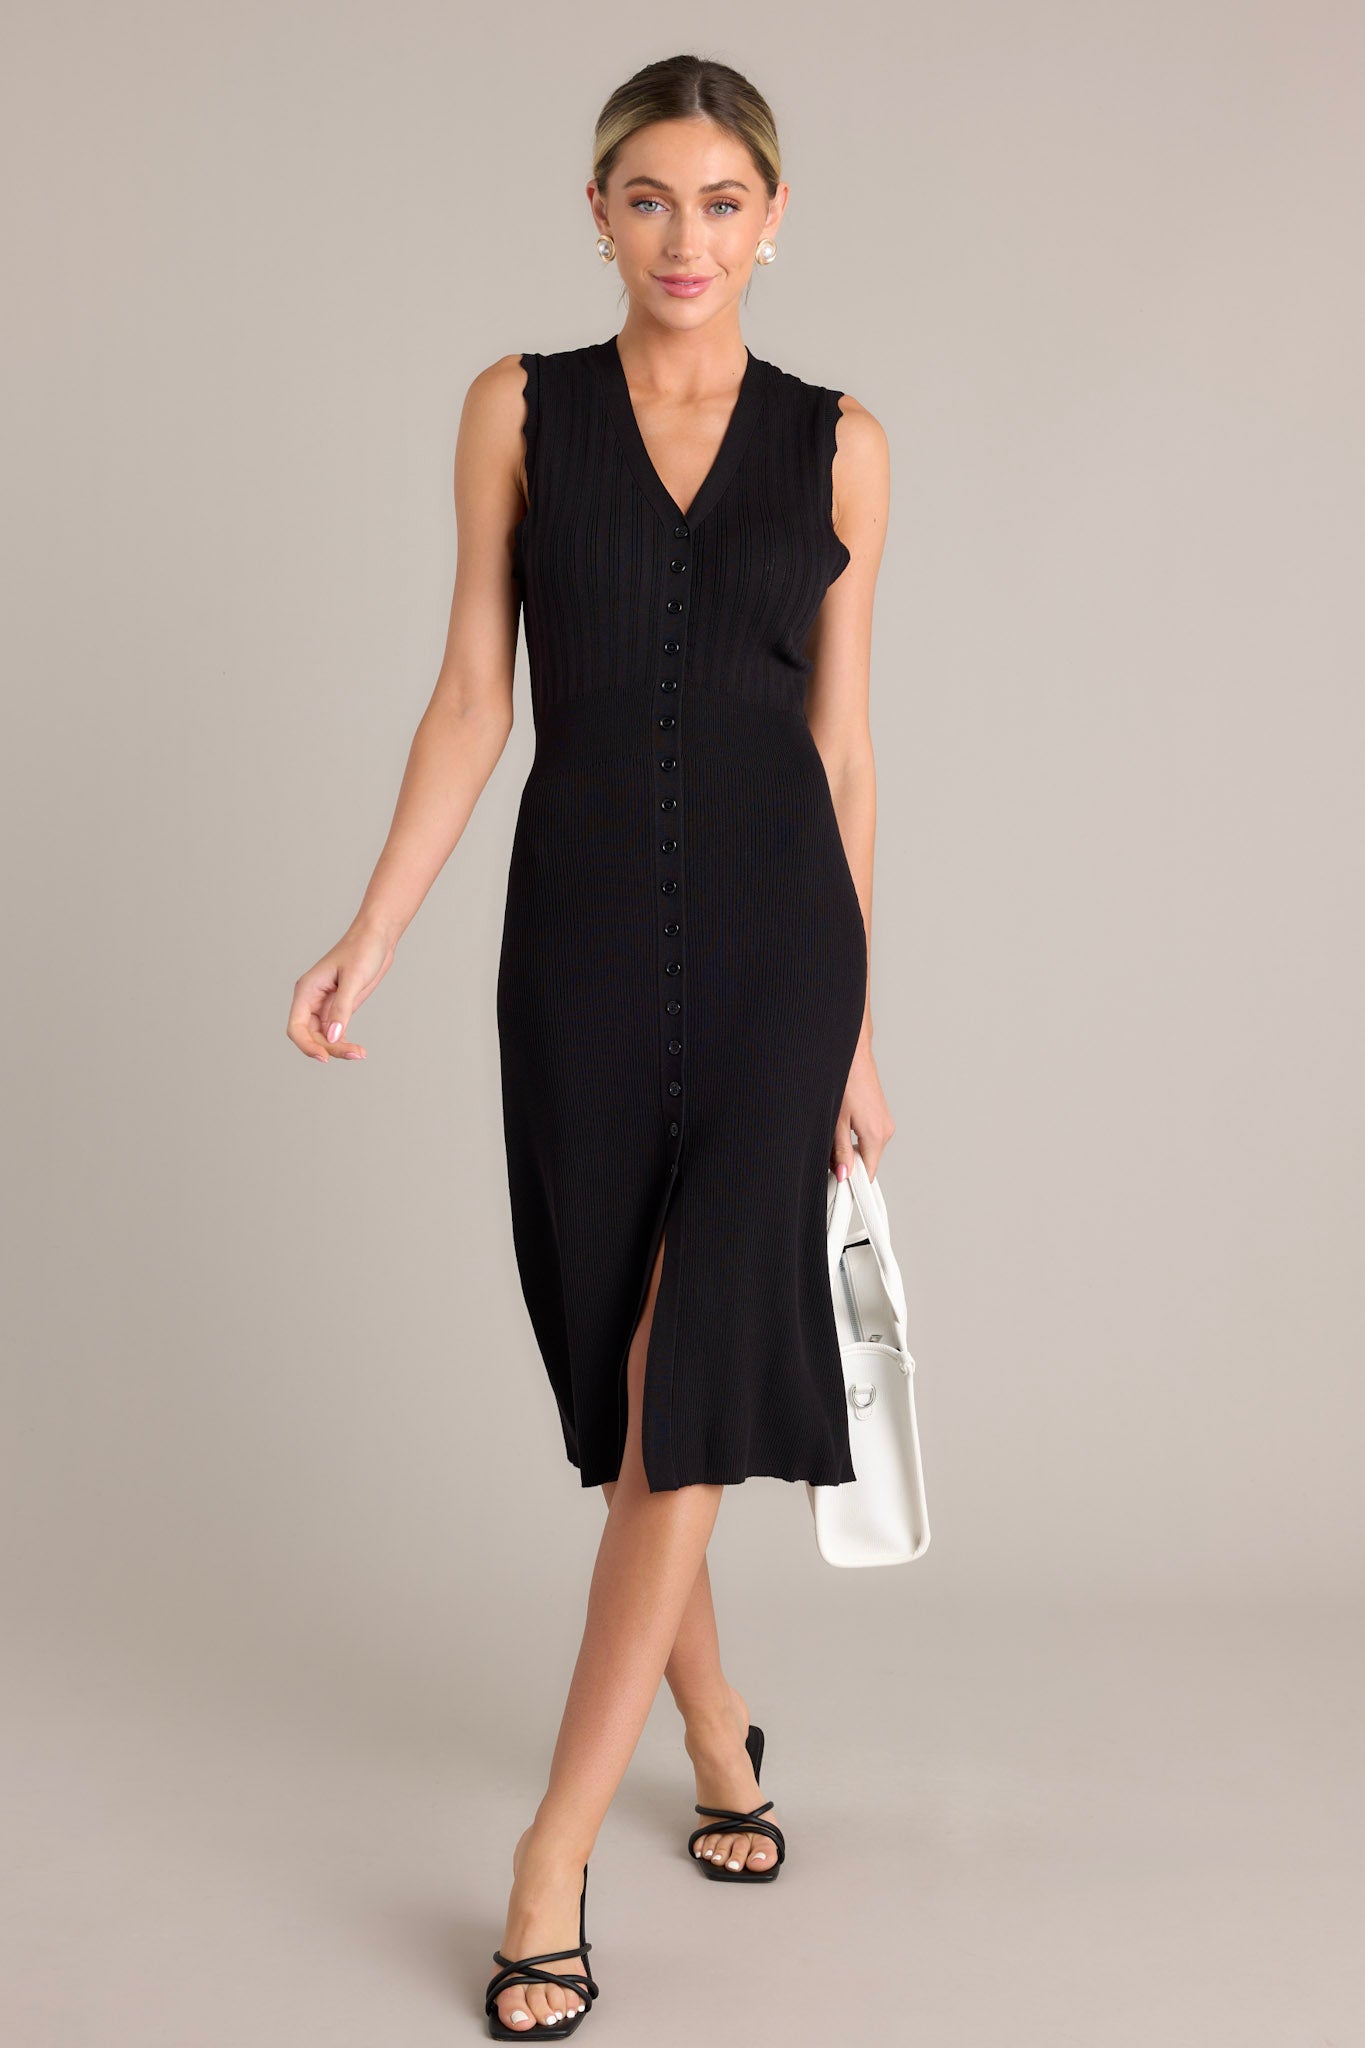 Full length view of a black dress with a v-neckline, a functional button front, a front slit, and scalloped sleeves